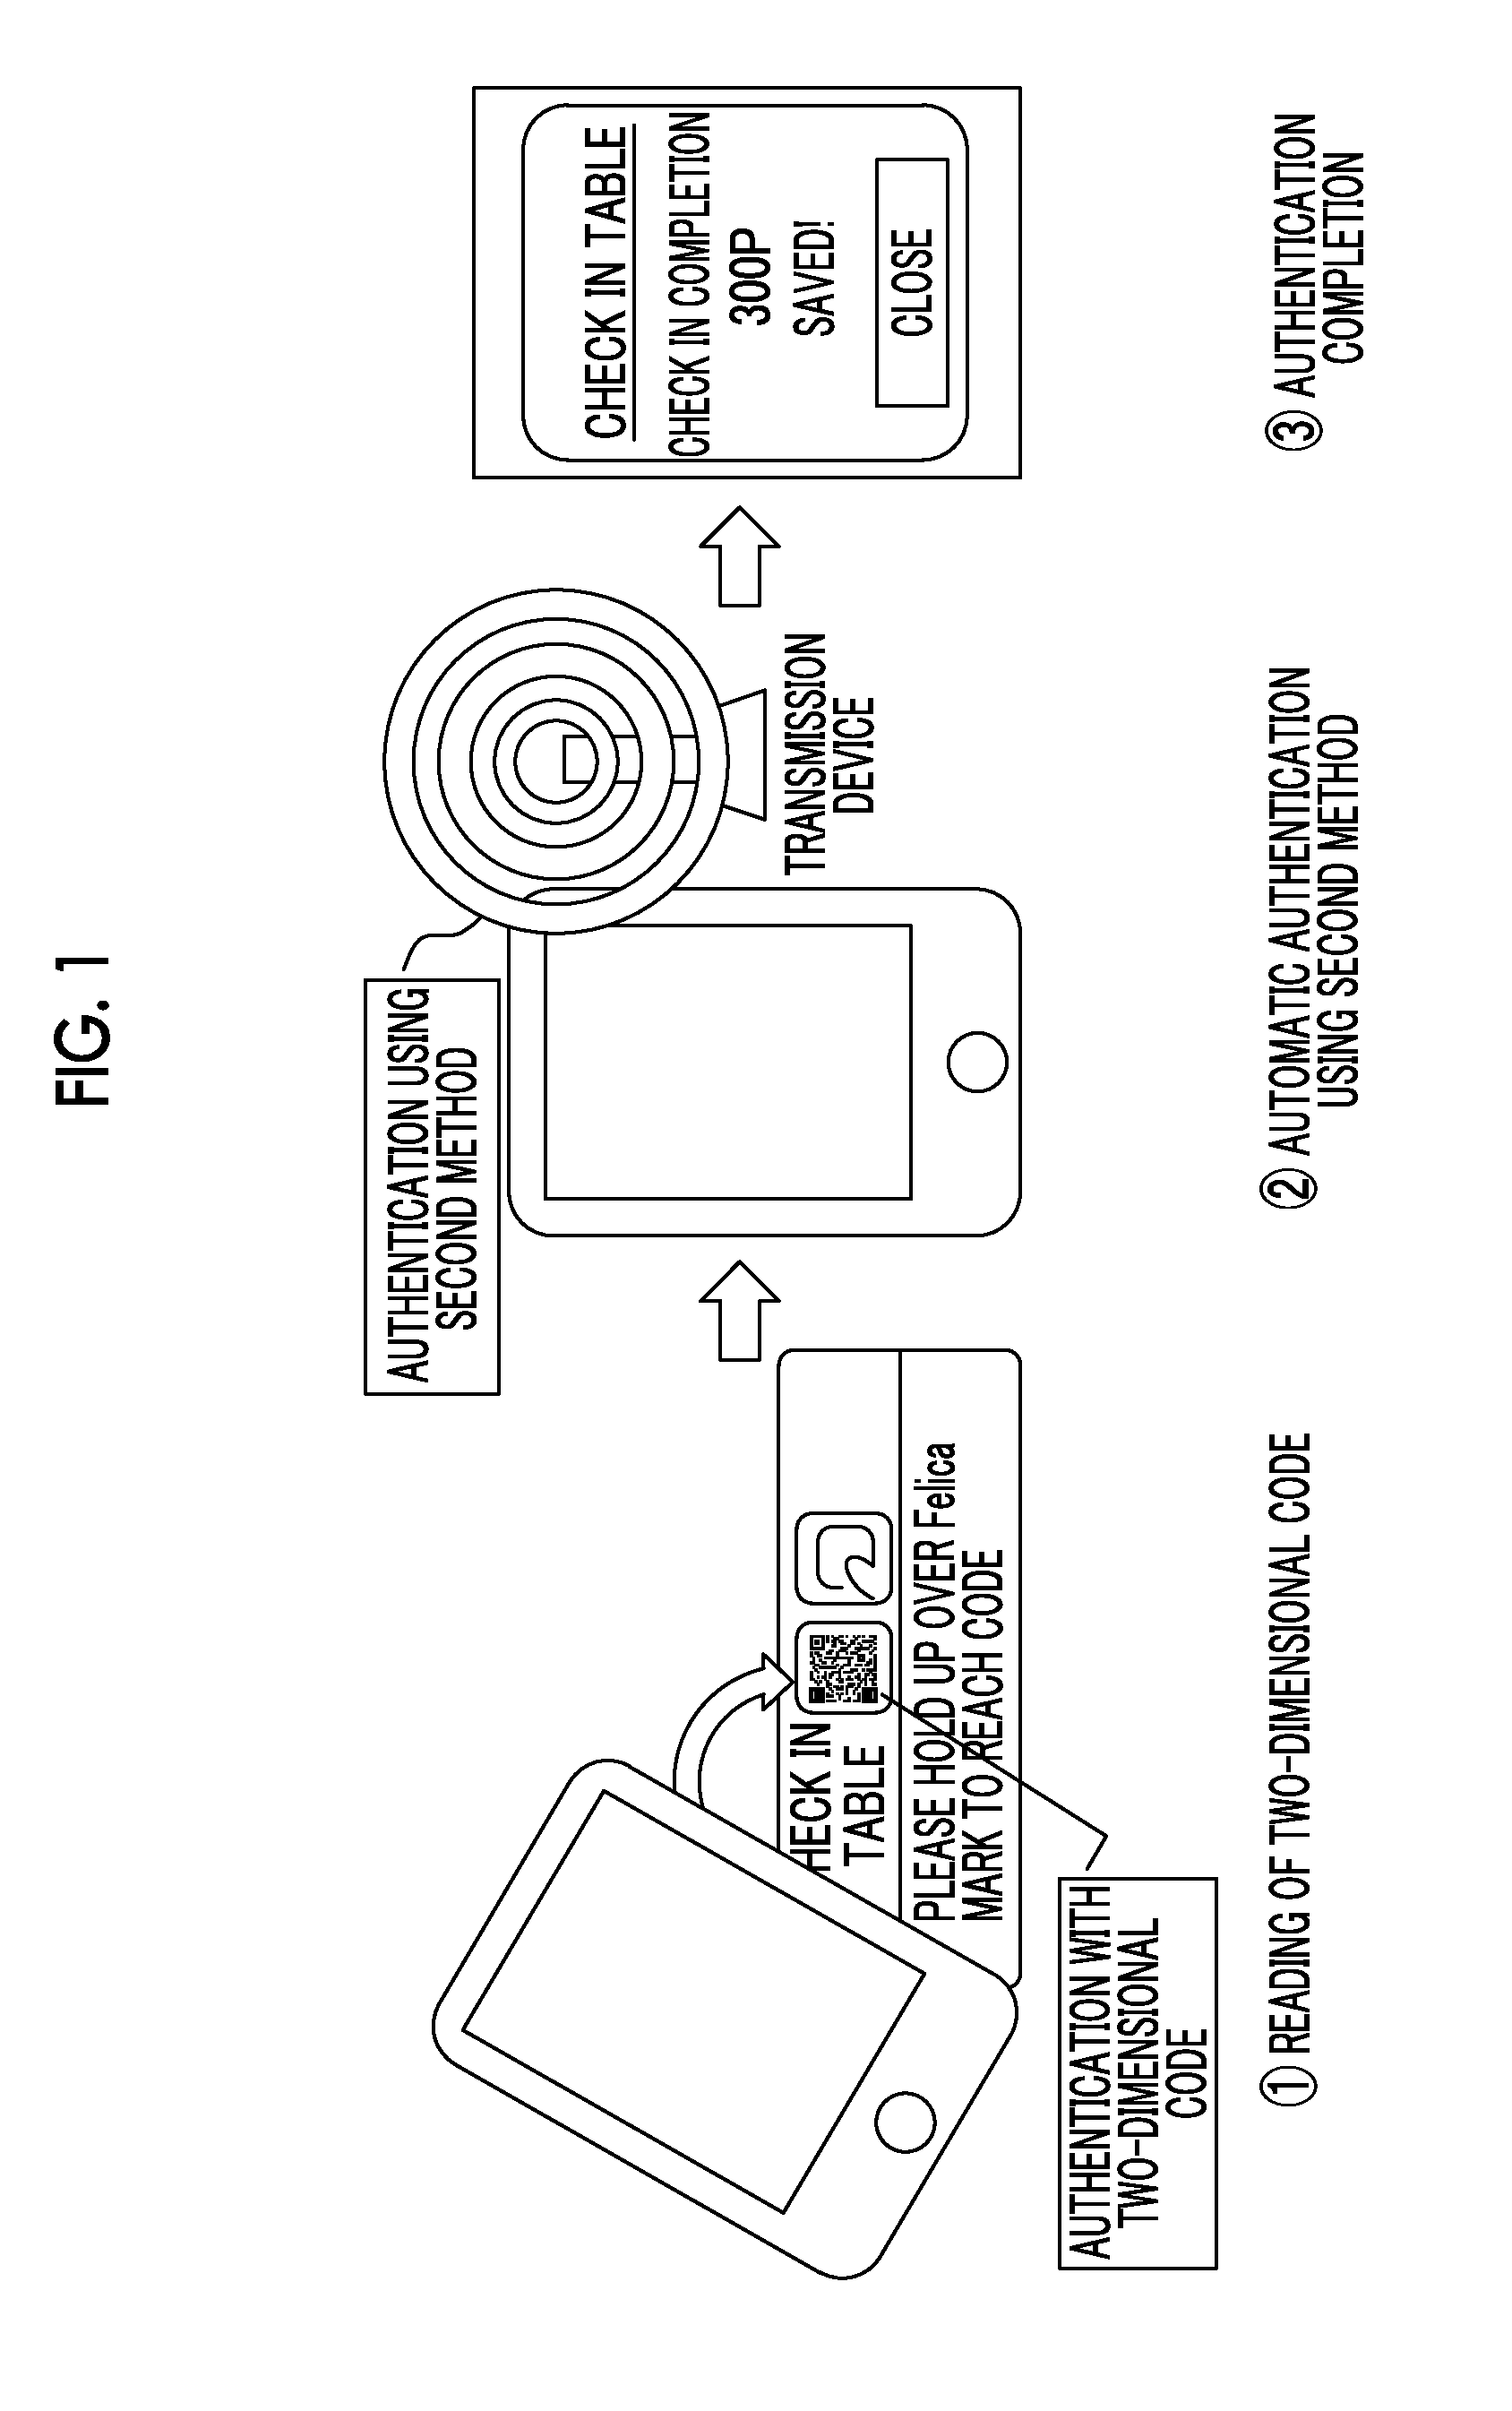 Authentication processing system